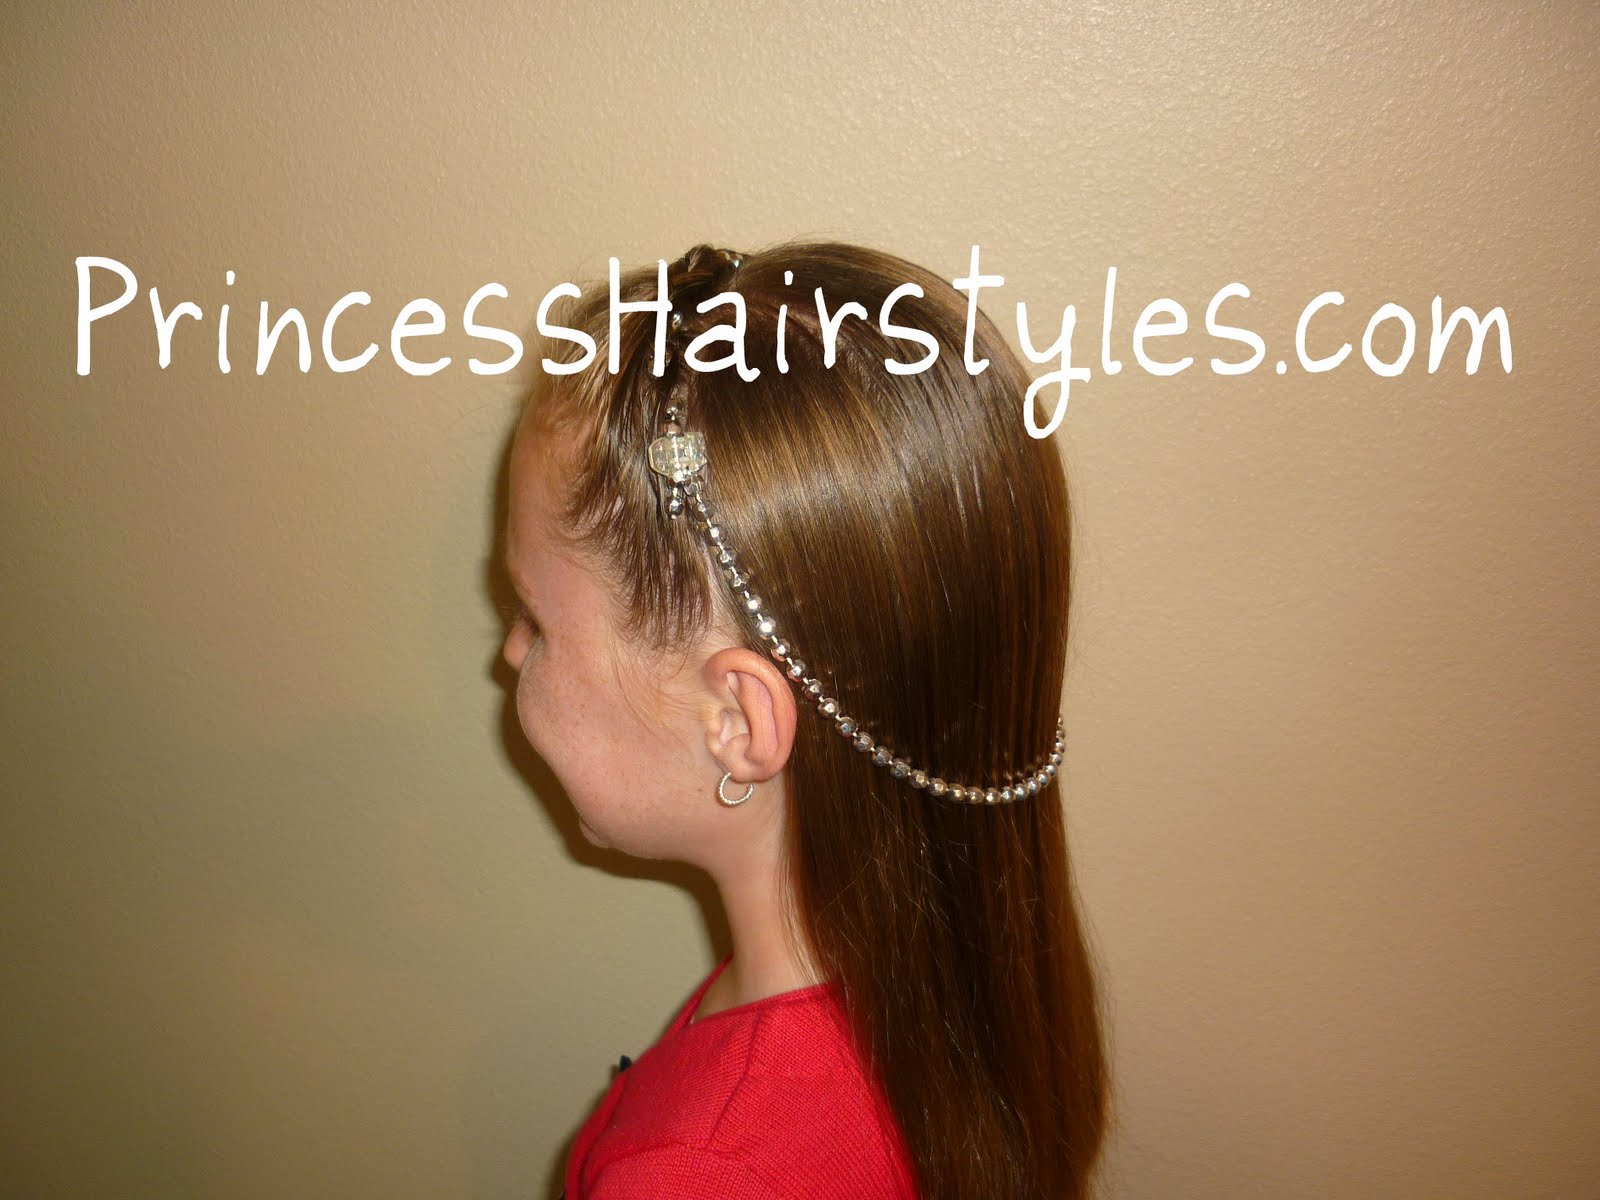 Hairstyles, Princess Braided Headband With Jewels | Hairstyles ...